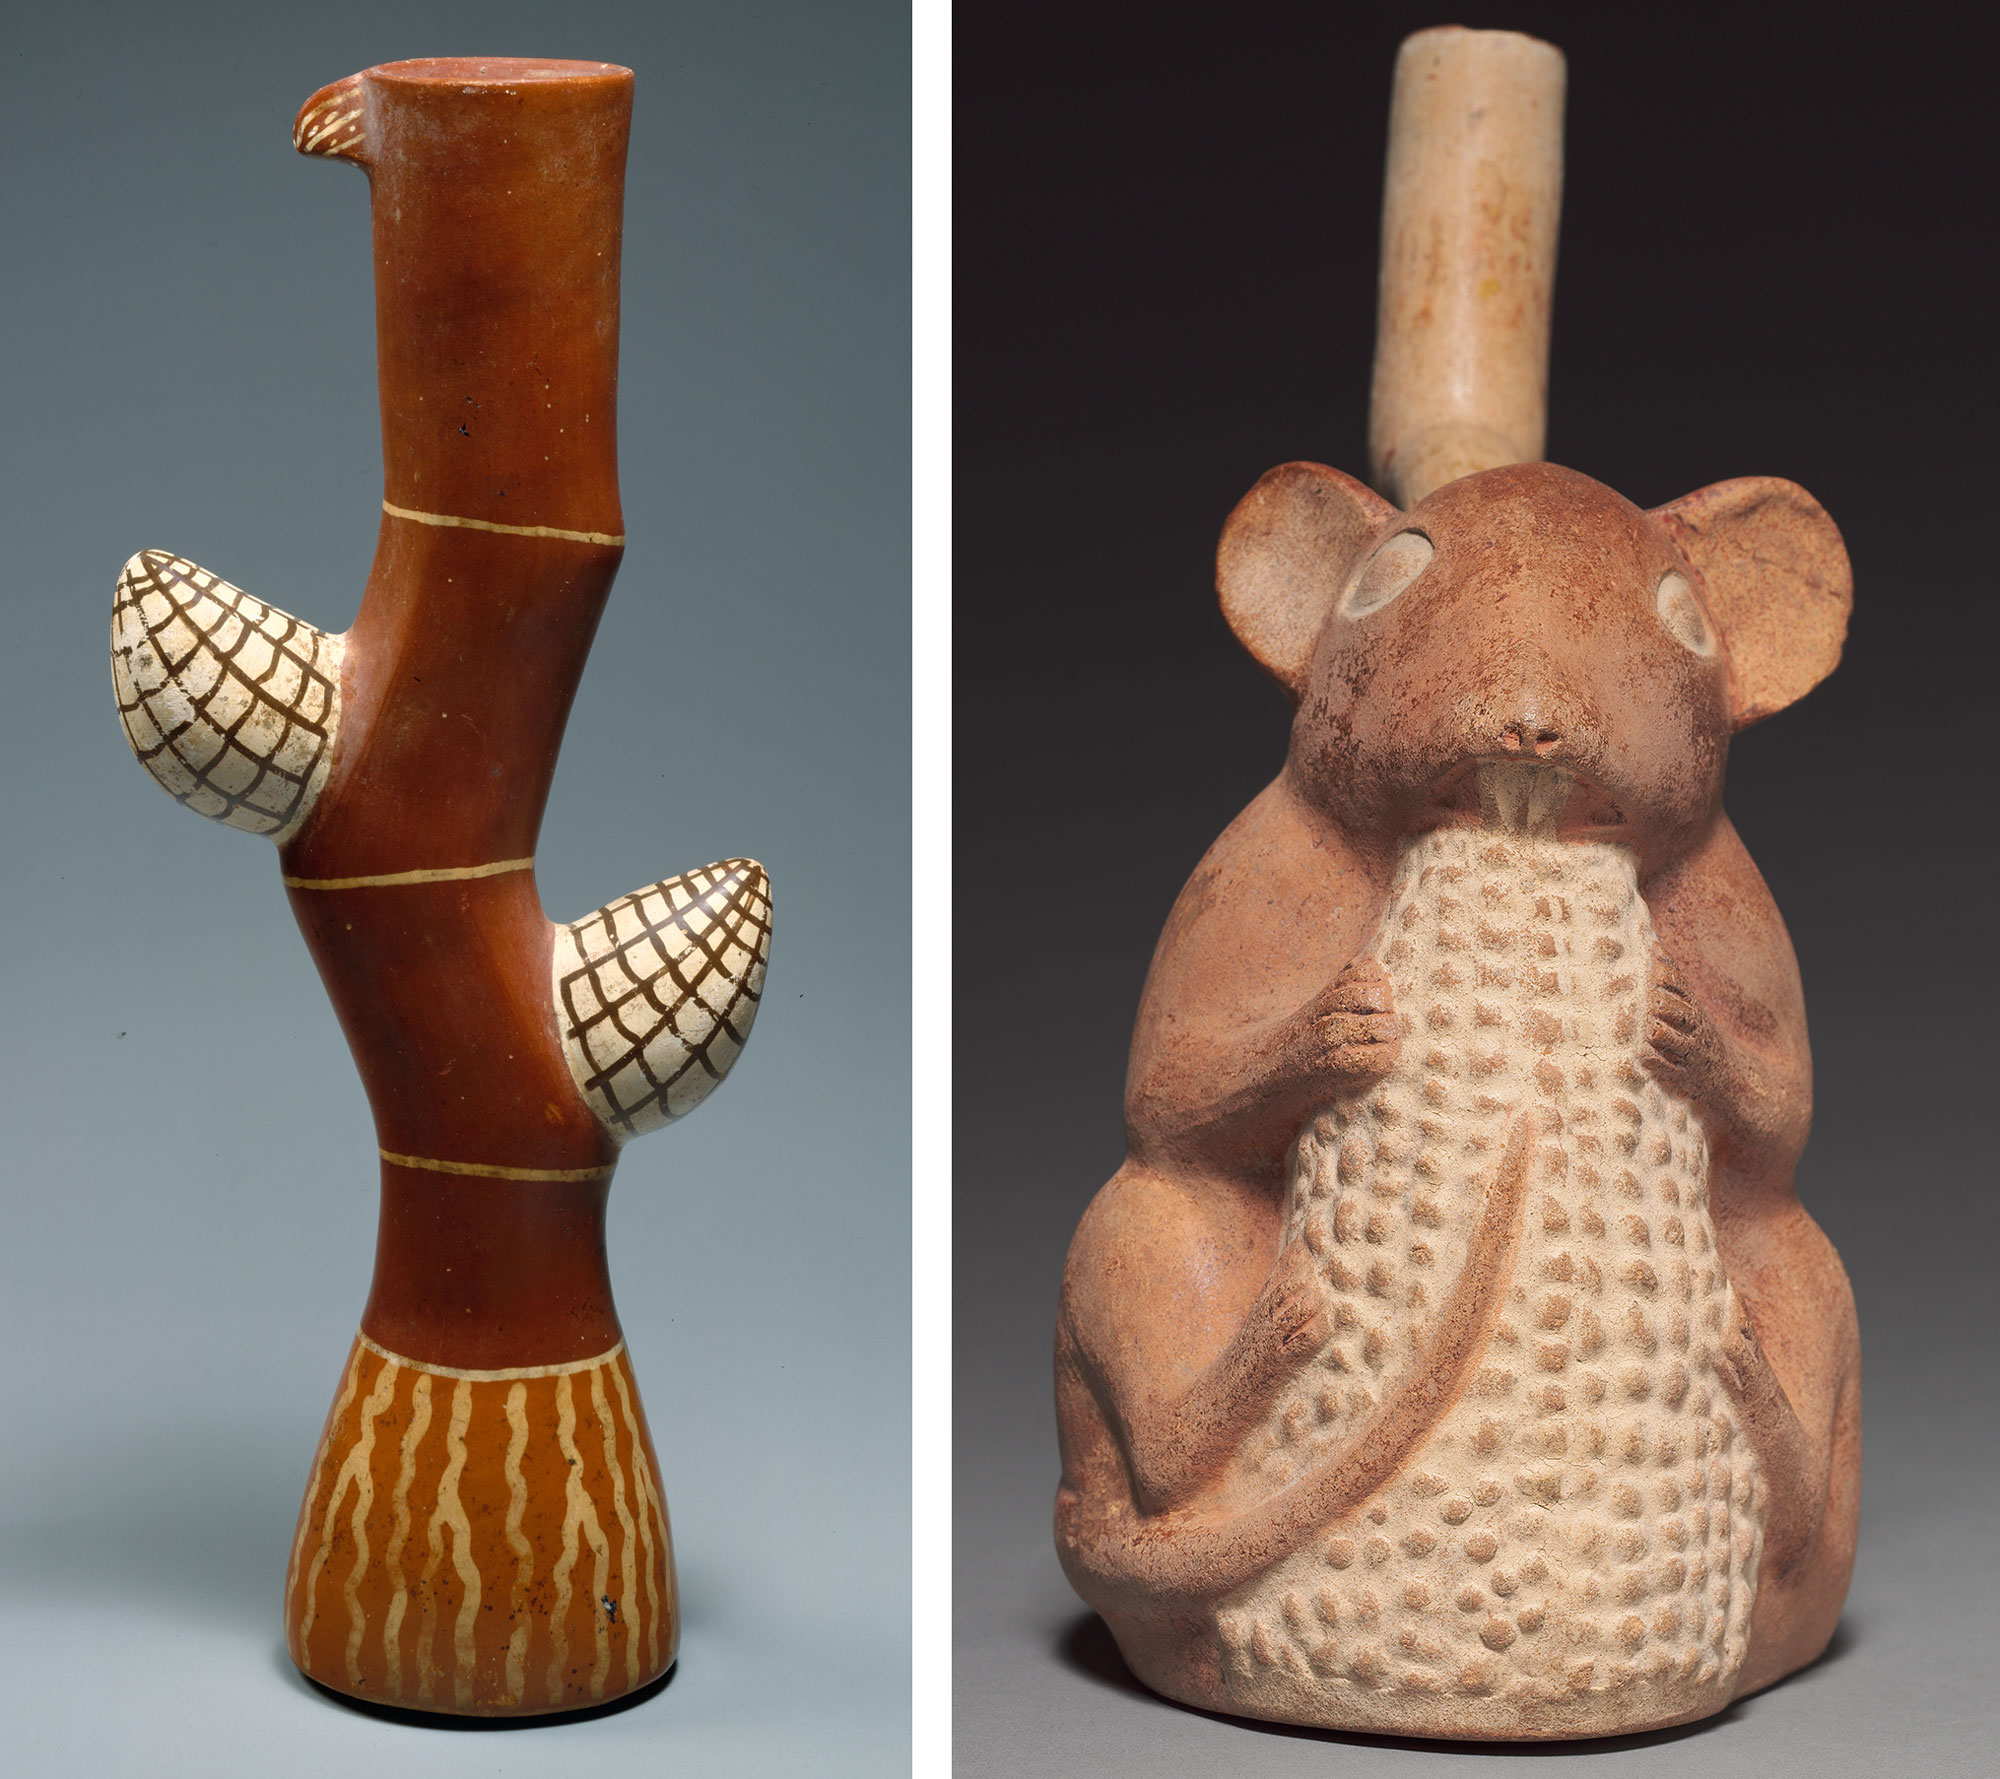 2-panel figure showing photos of ancient ceramics from Peru featuring maize. Panel 1: A vessel shaped like a stalk of maize with two ears. Panel 2: Vessel shaped like a rodent nibbling on an ear of maize.